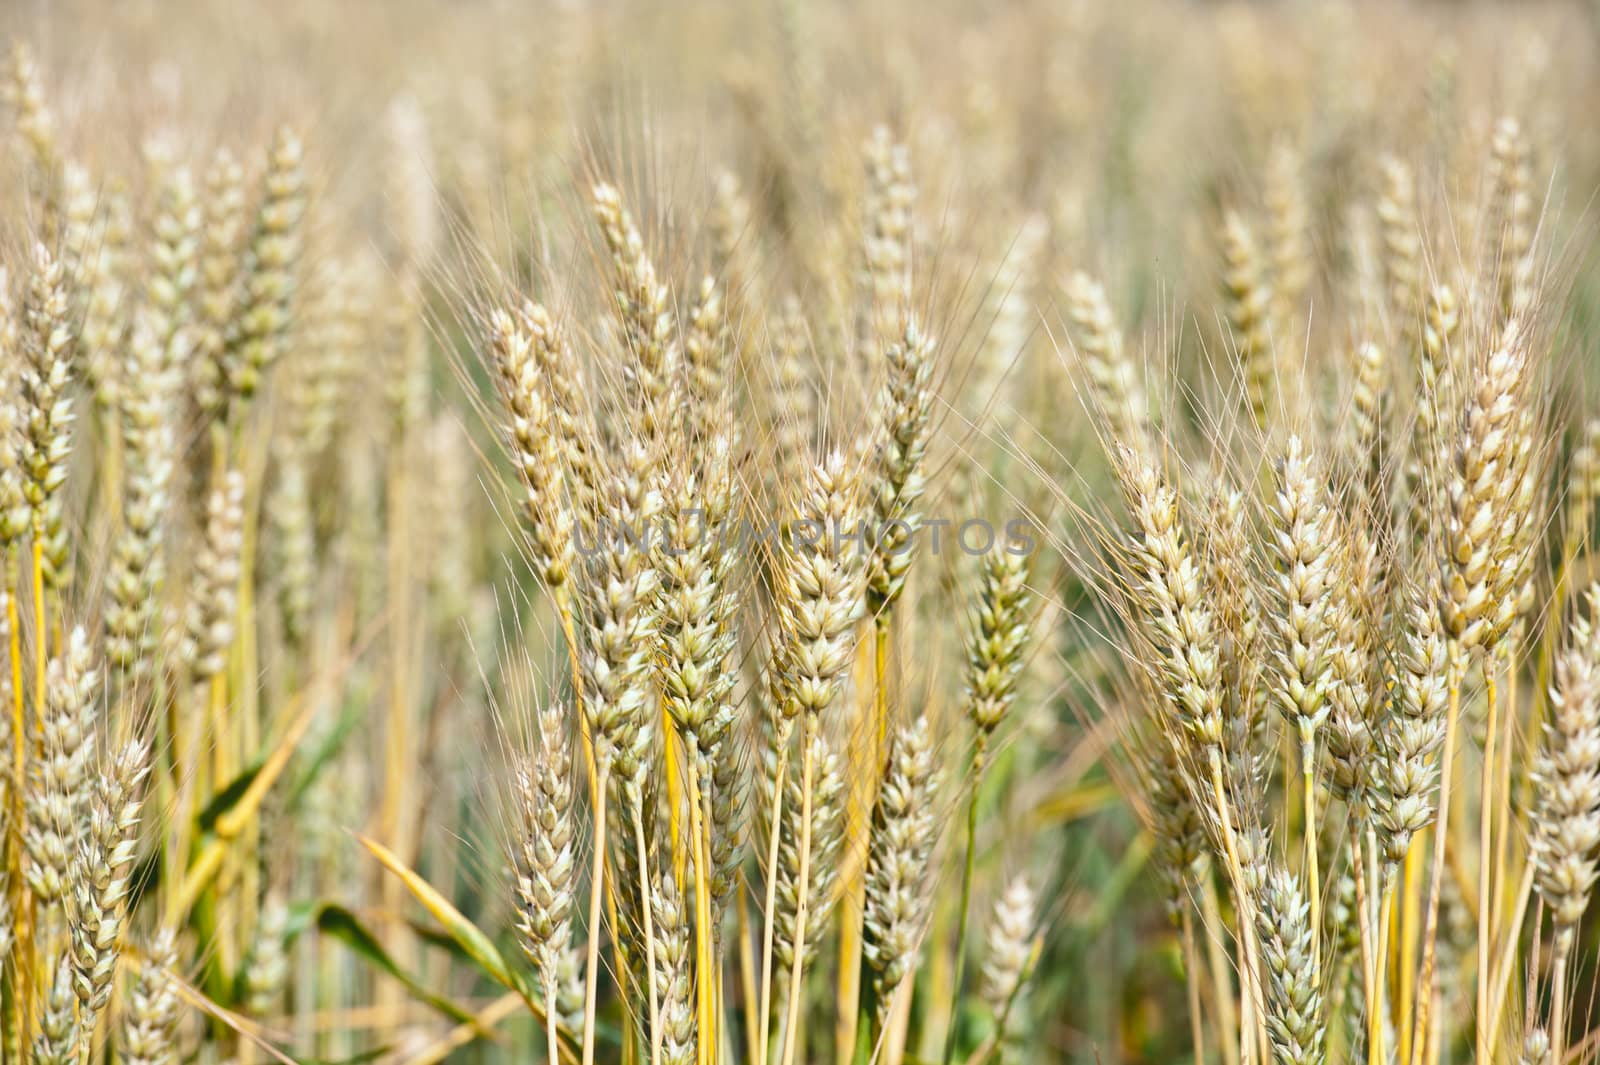 Field of golden wheat ready to harvest